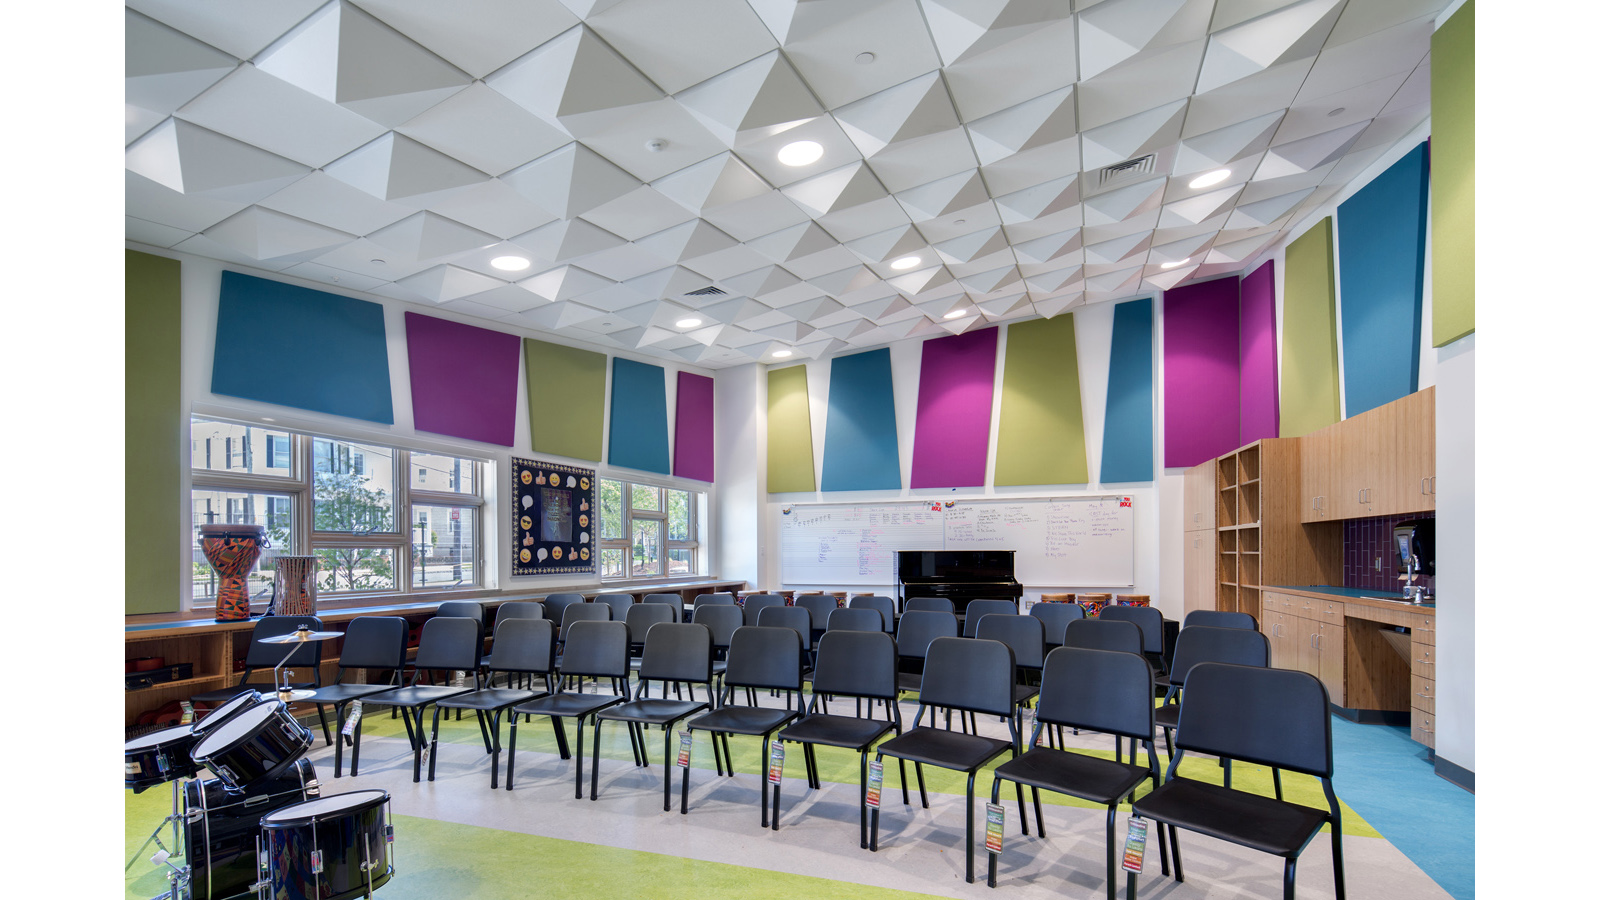 Irwin Jacobs Elementary School Interior, music classroom with drums, piano and other instruments.